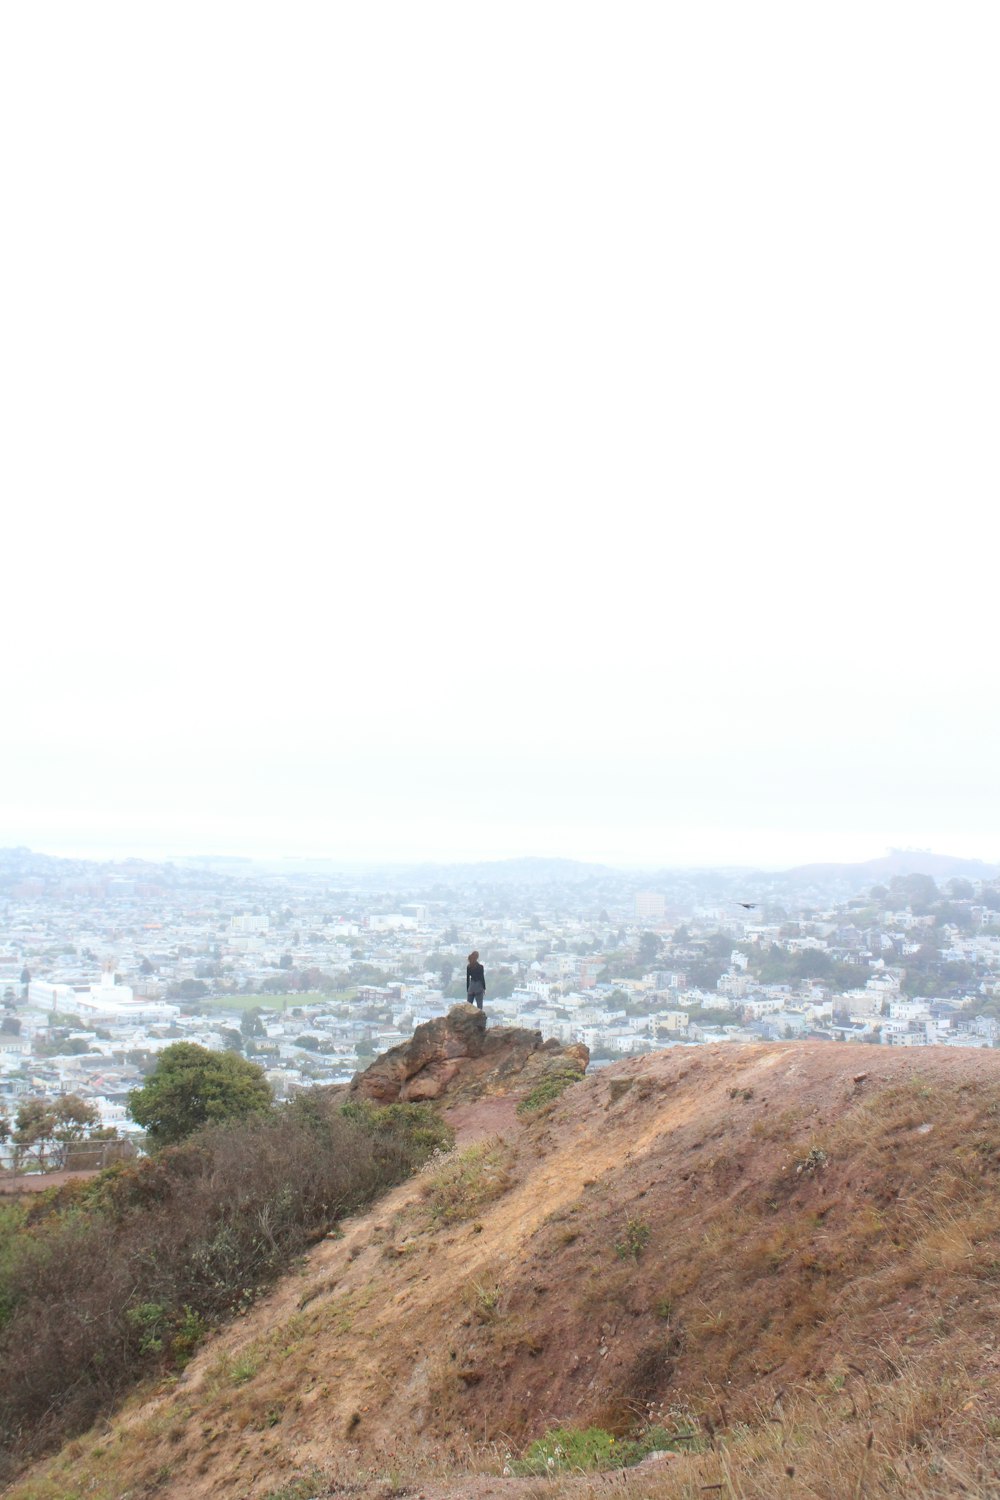 a person standing on top of a hill overlooking a city